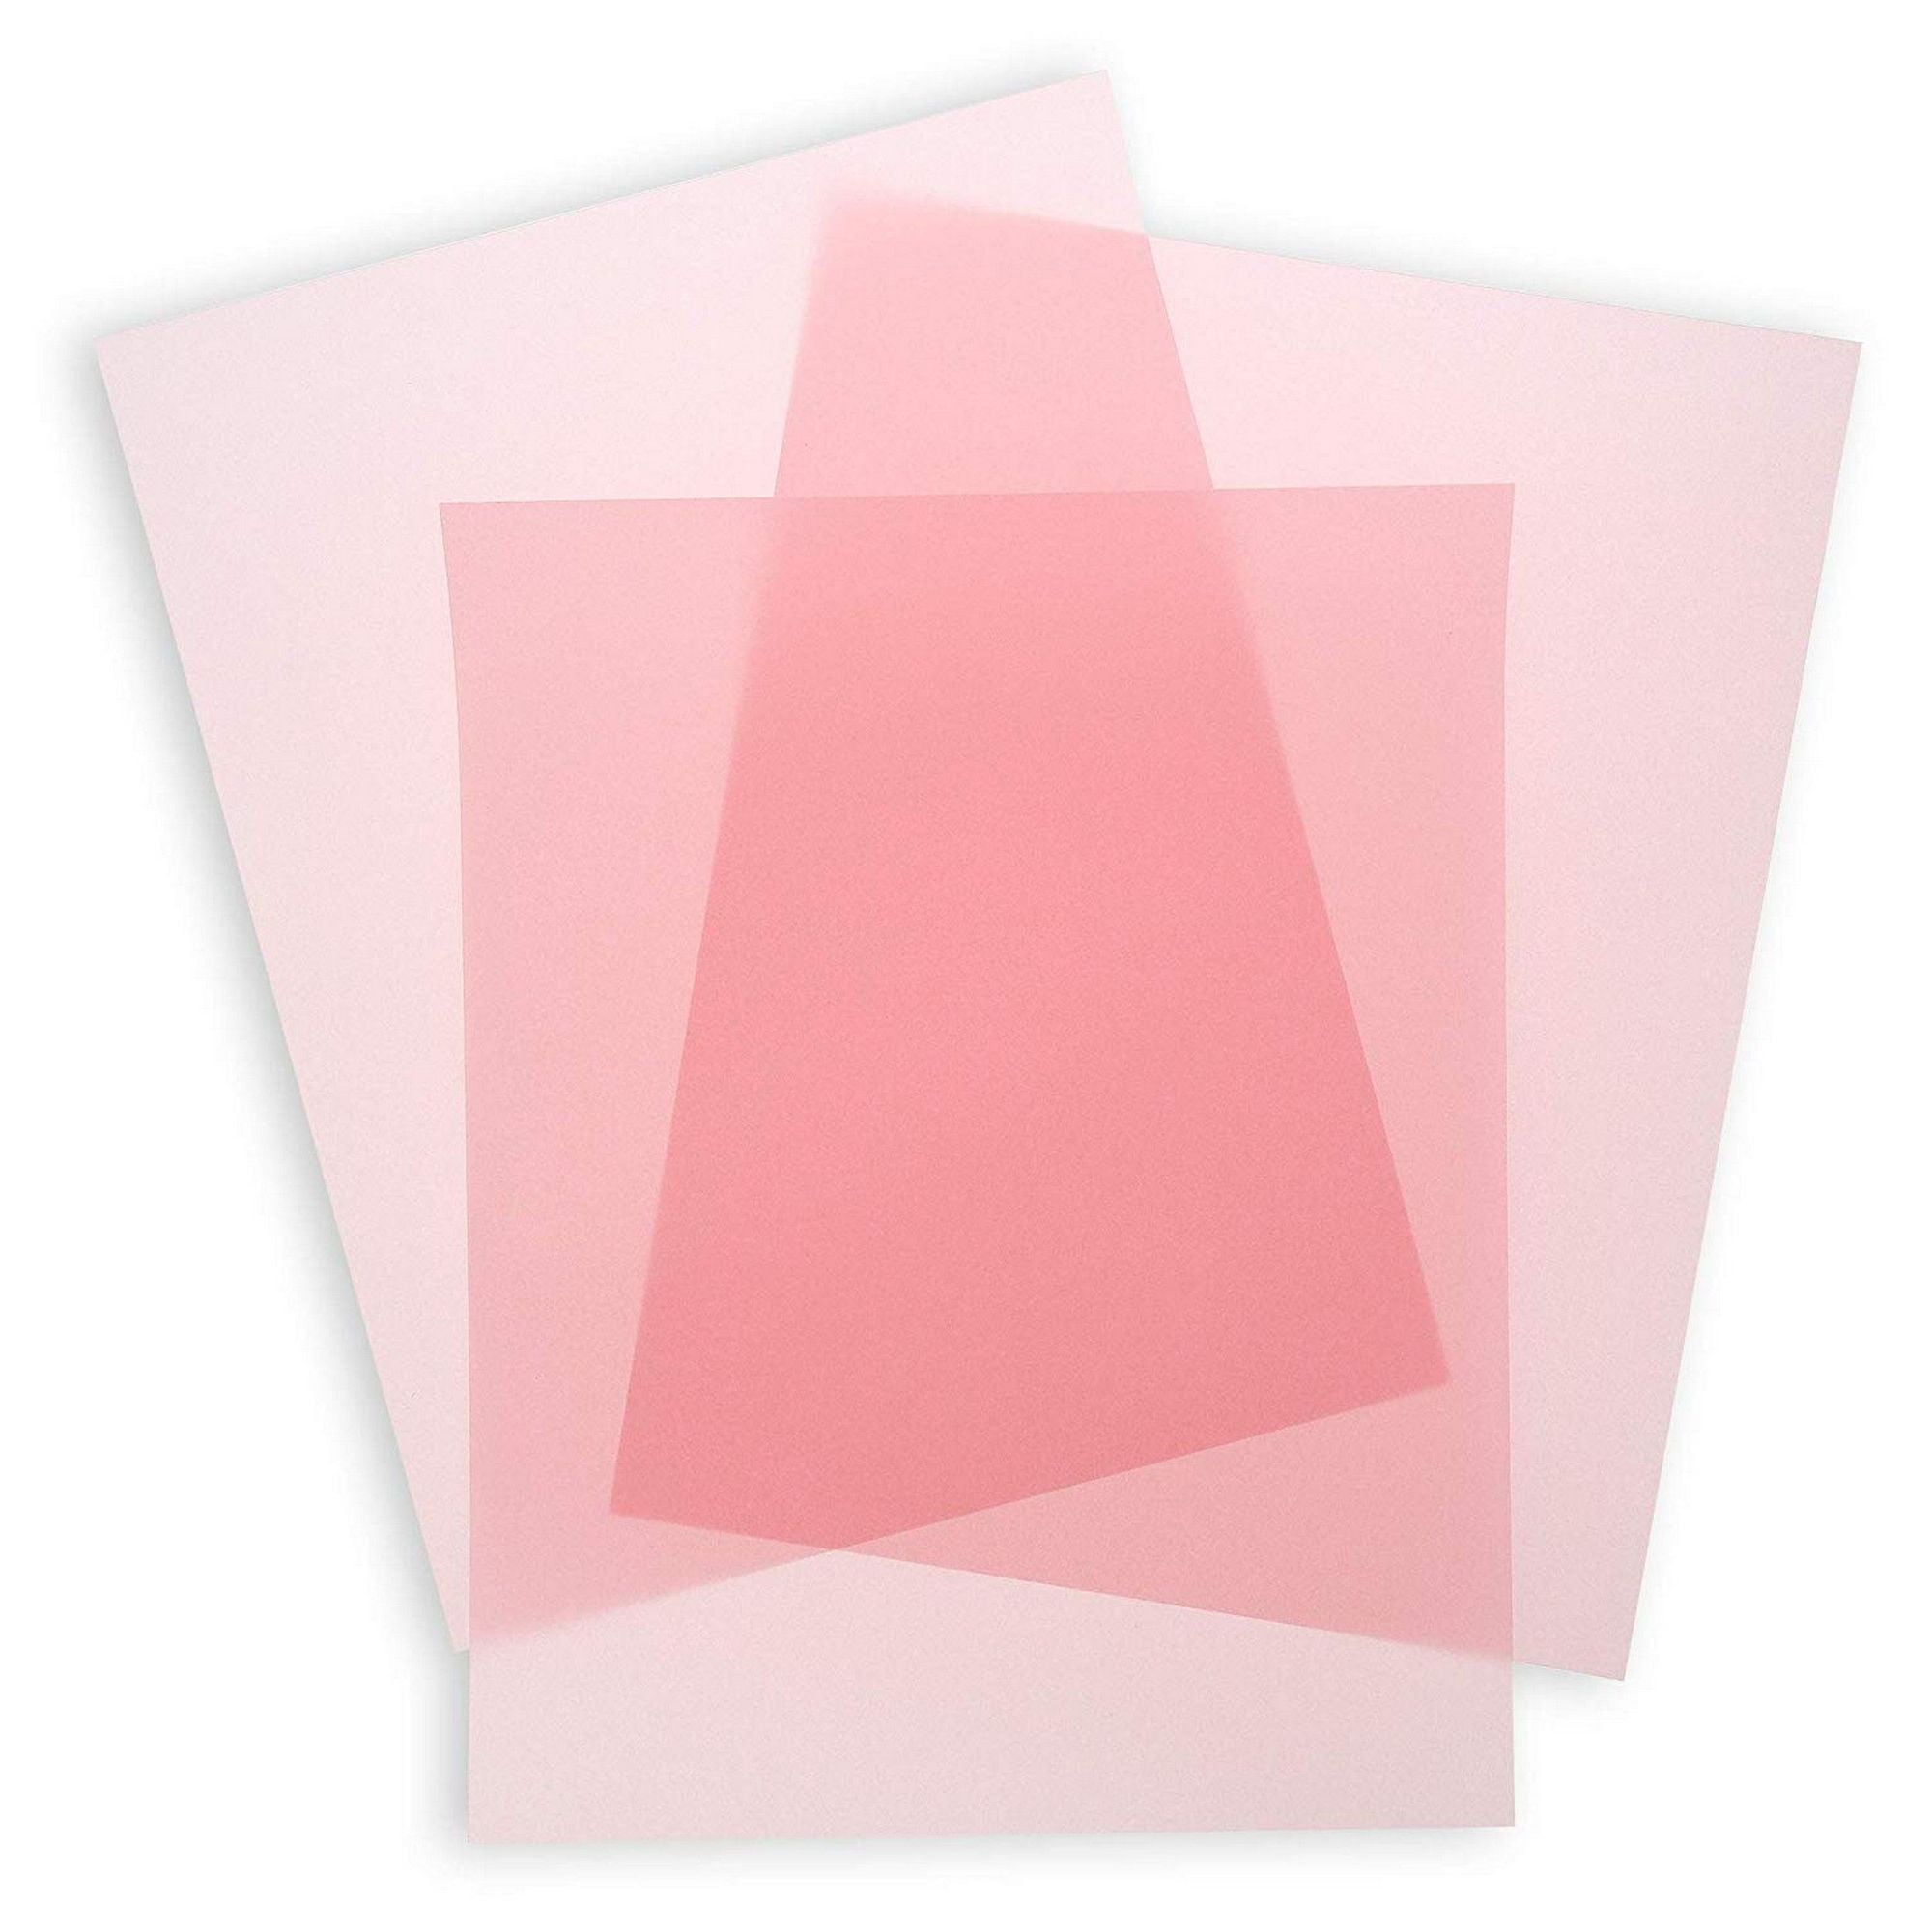 50 Sheets Translucent Pink Vellum Printable Paper for Invitations Card